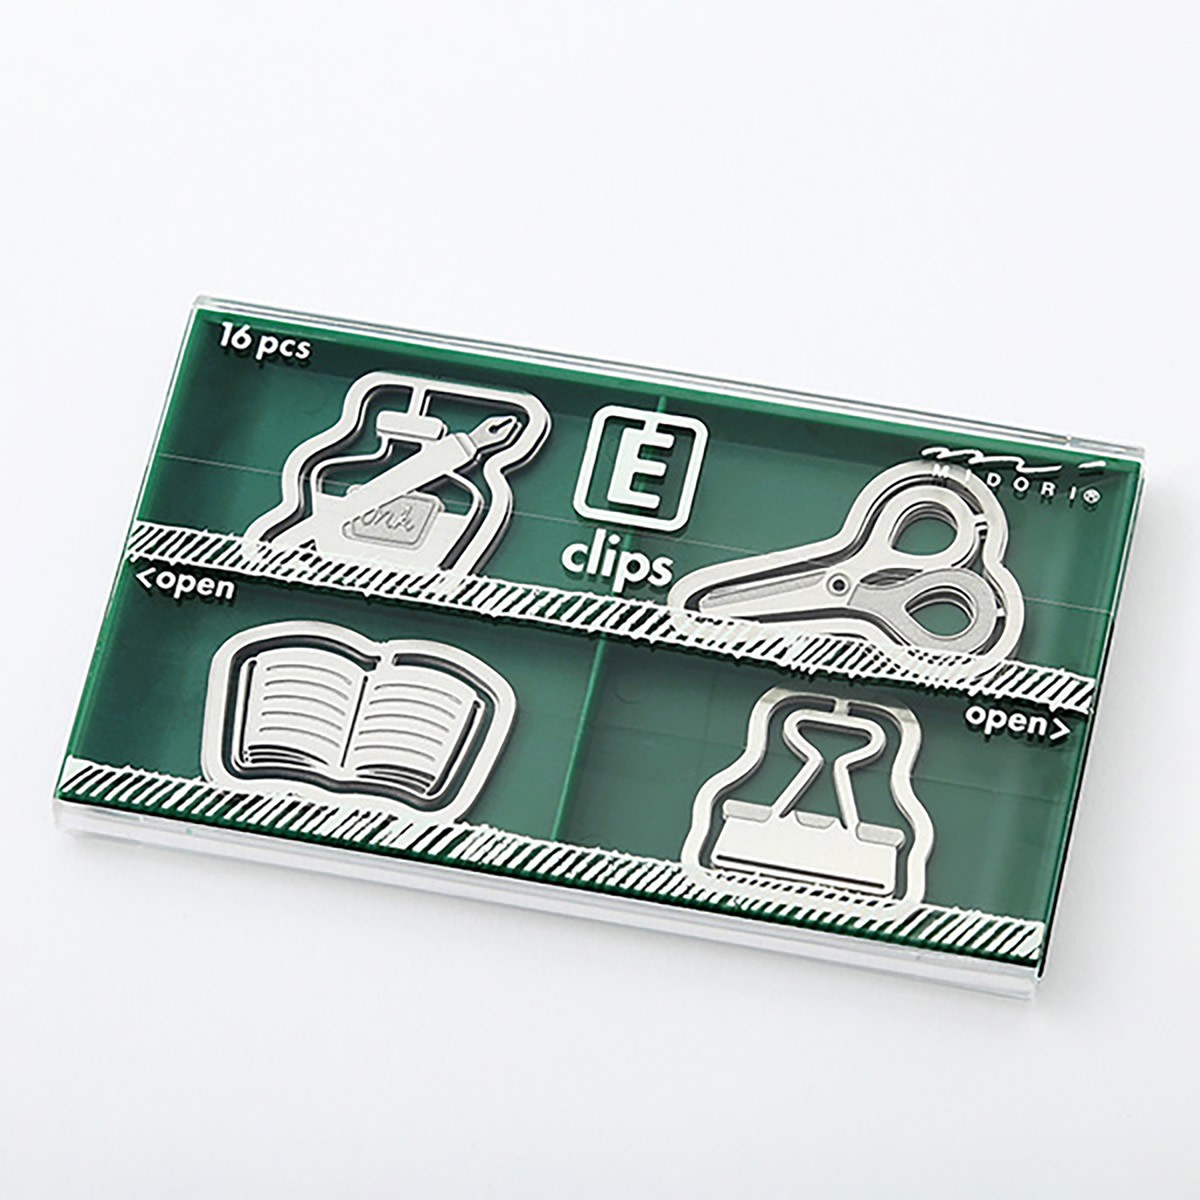 Etching Clips Stationery Σετ Σελιδοδείκτες